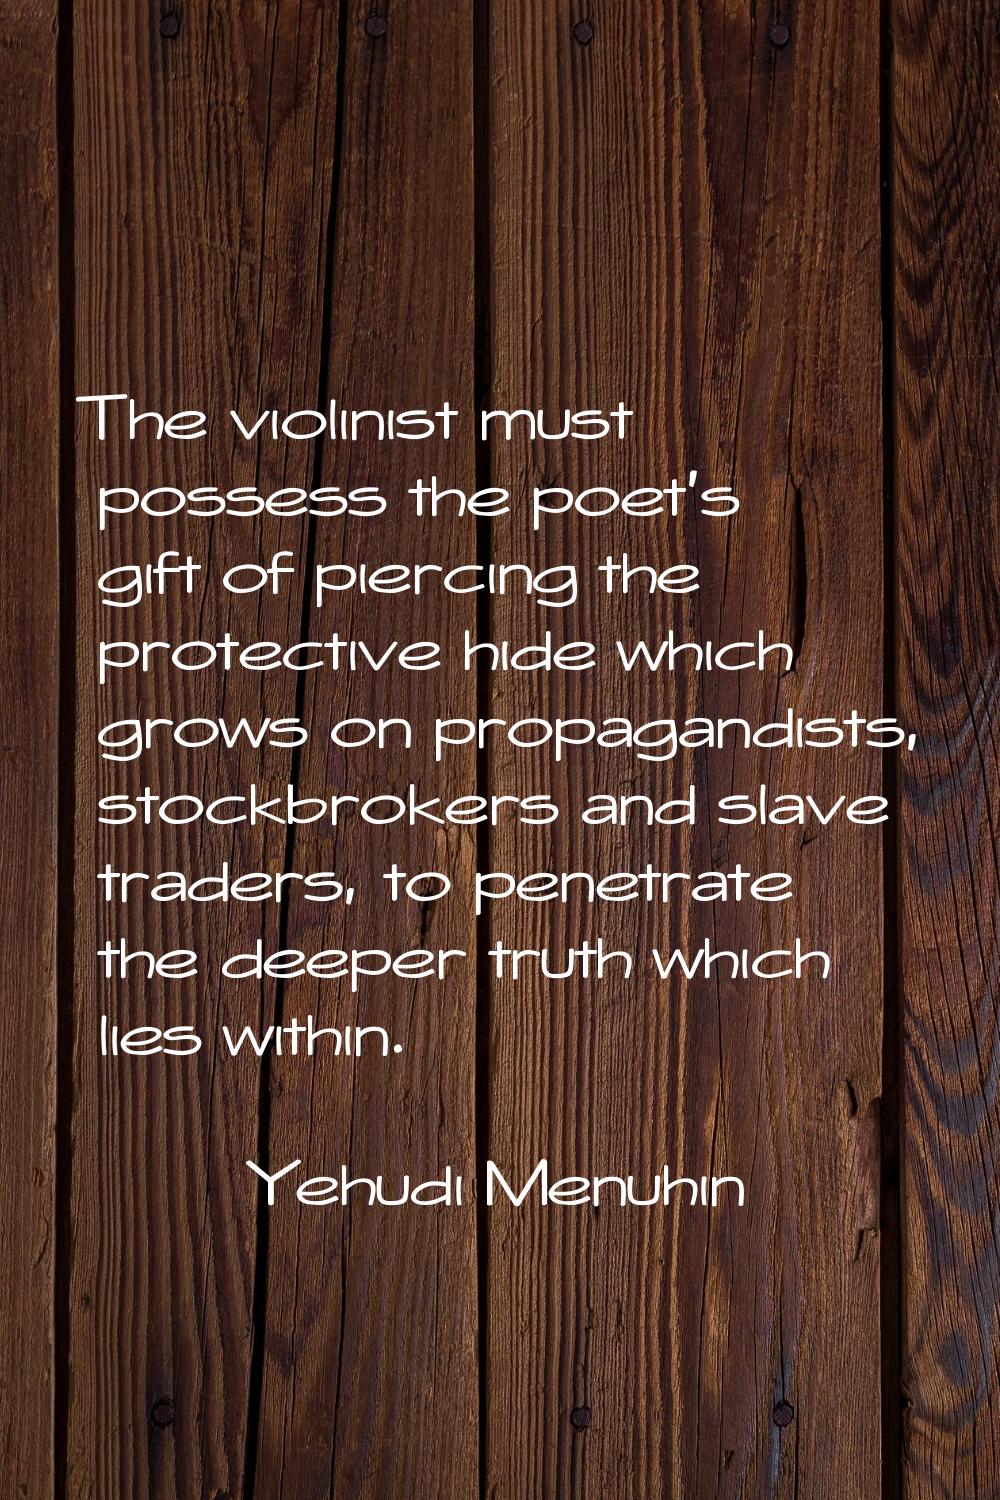 The violinist must possess the poet's gift of piercing the protective hide which grows on propagand